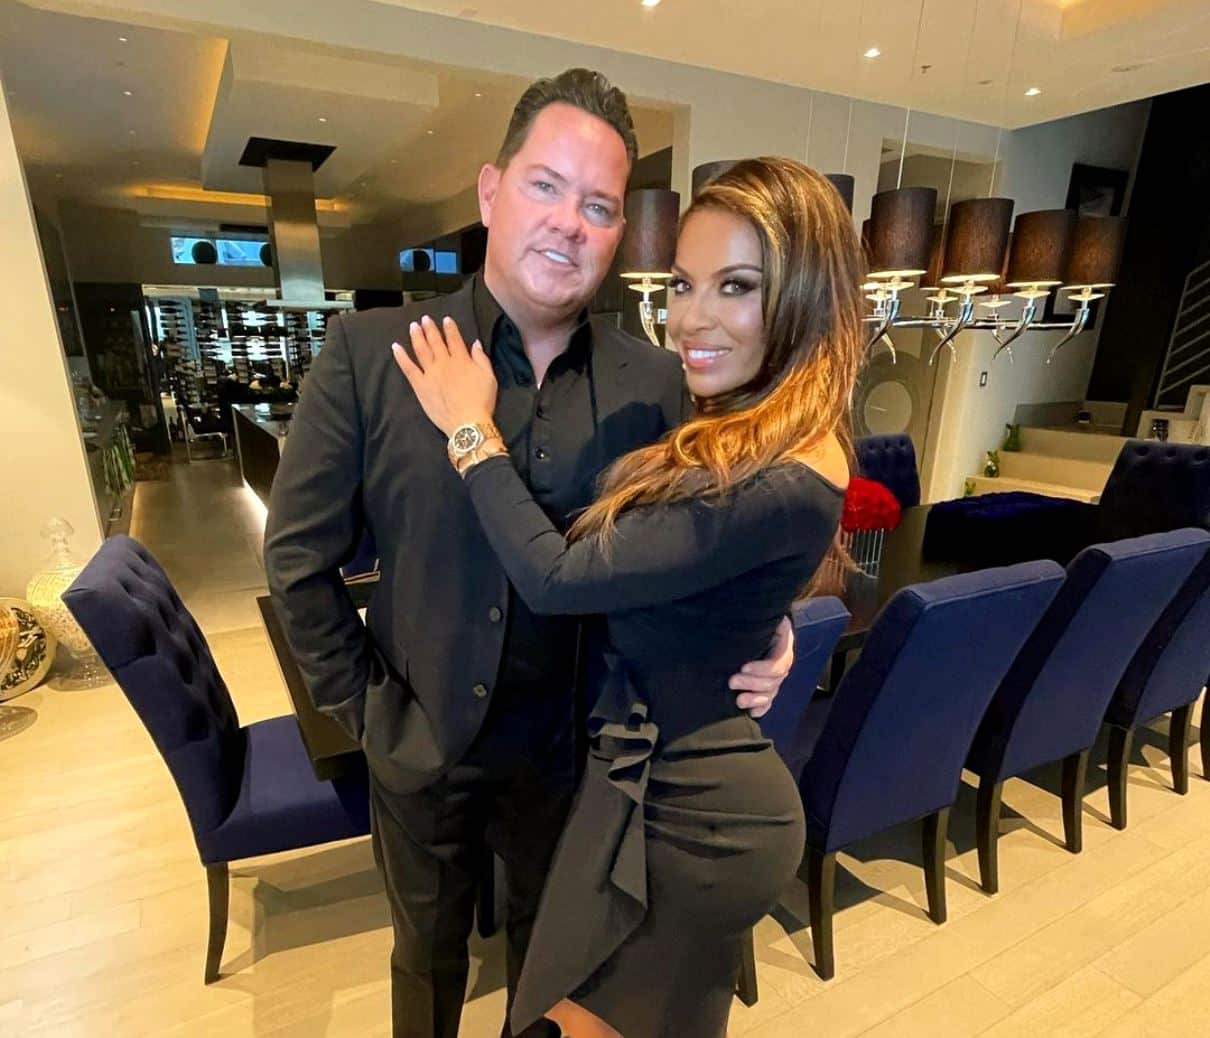 RHONJ Star Dolores Catania Shares Status of Boyfriend Paul’s Divorce and Explains Her Absence at Pre-Reunion Meeting Between Cast